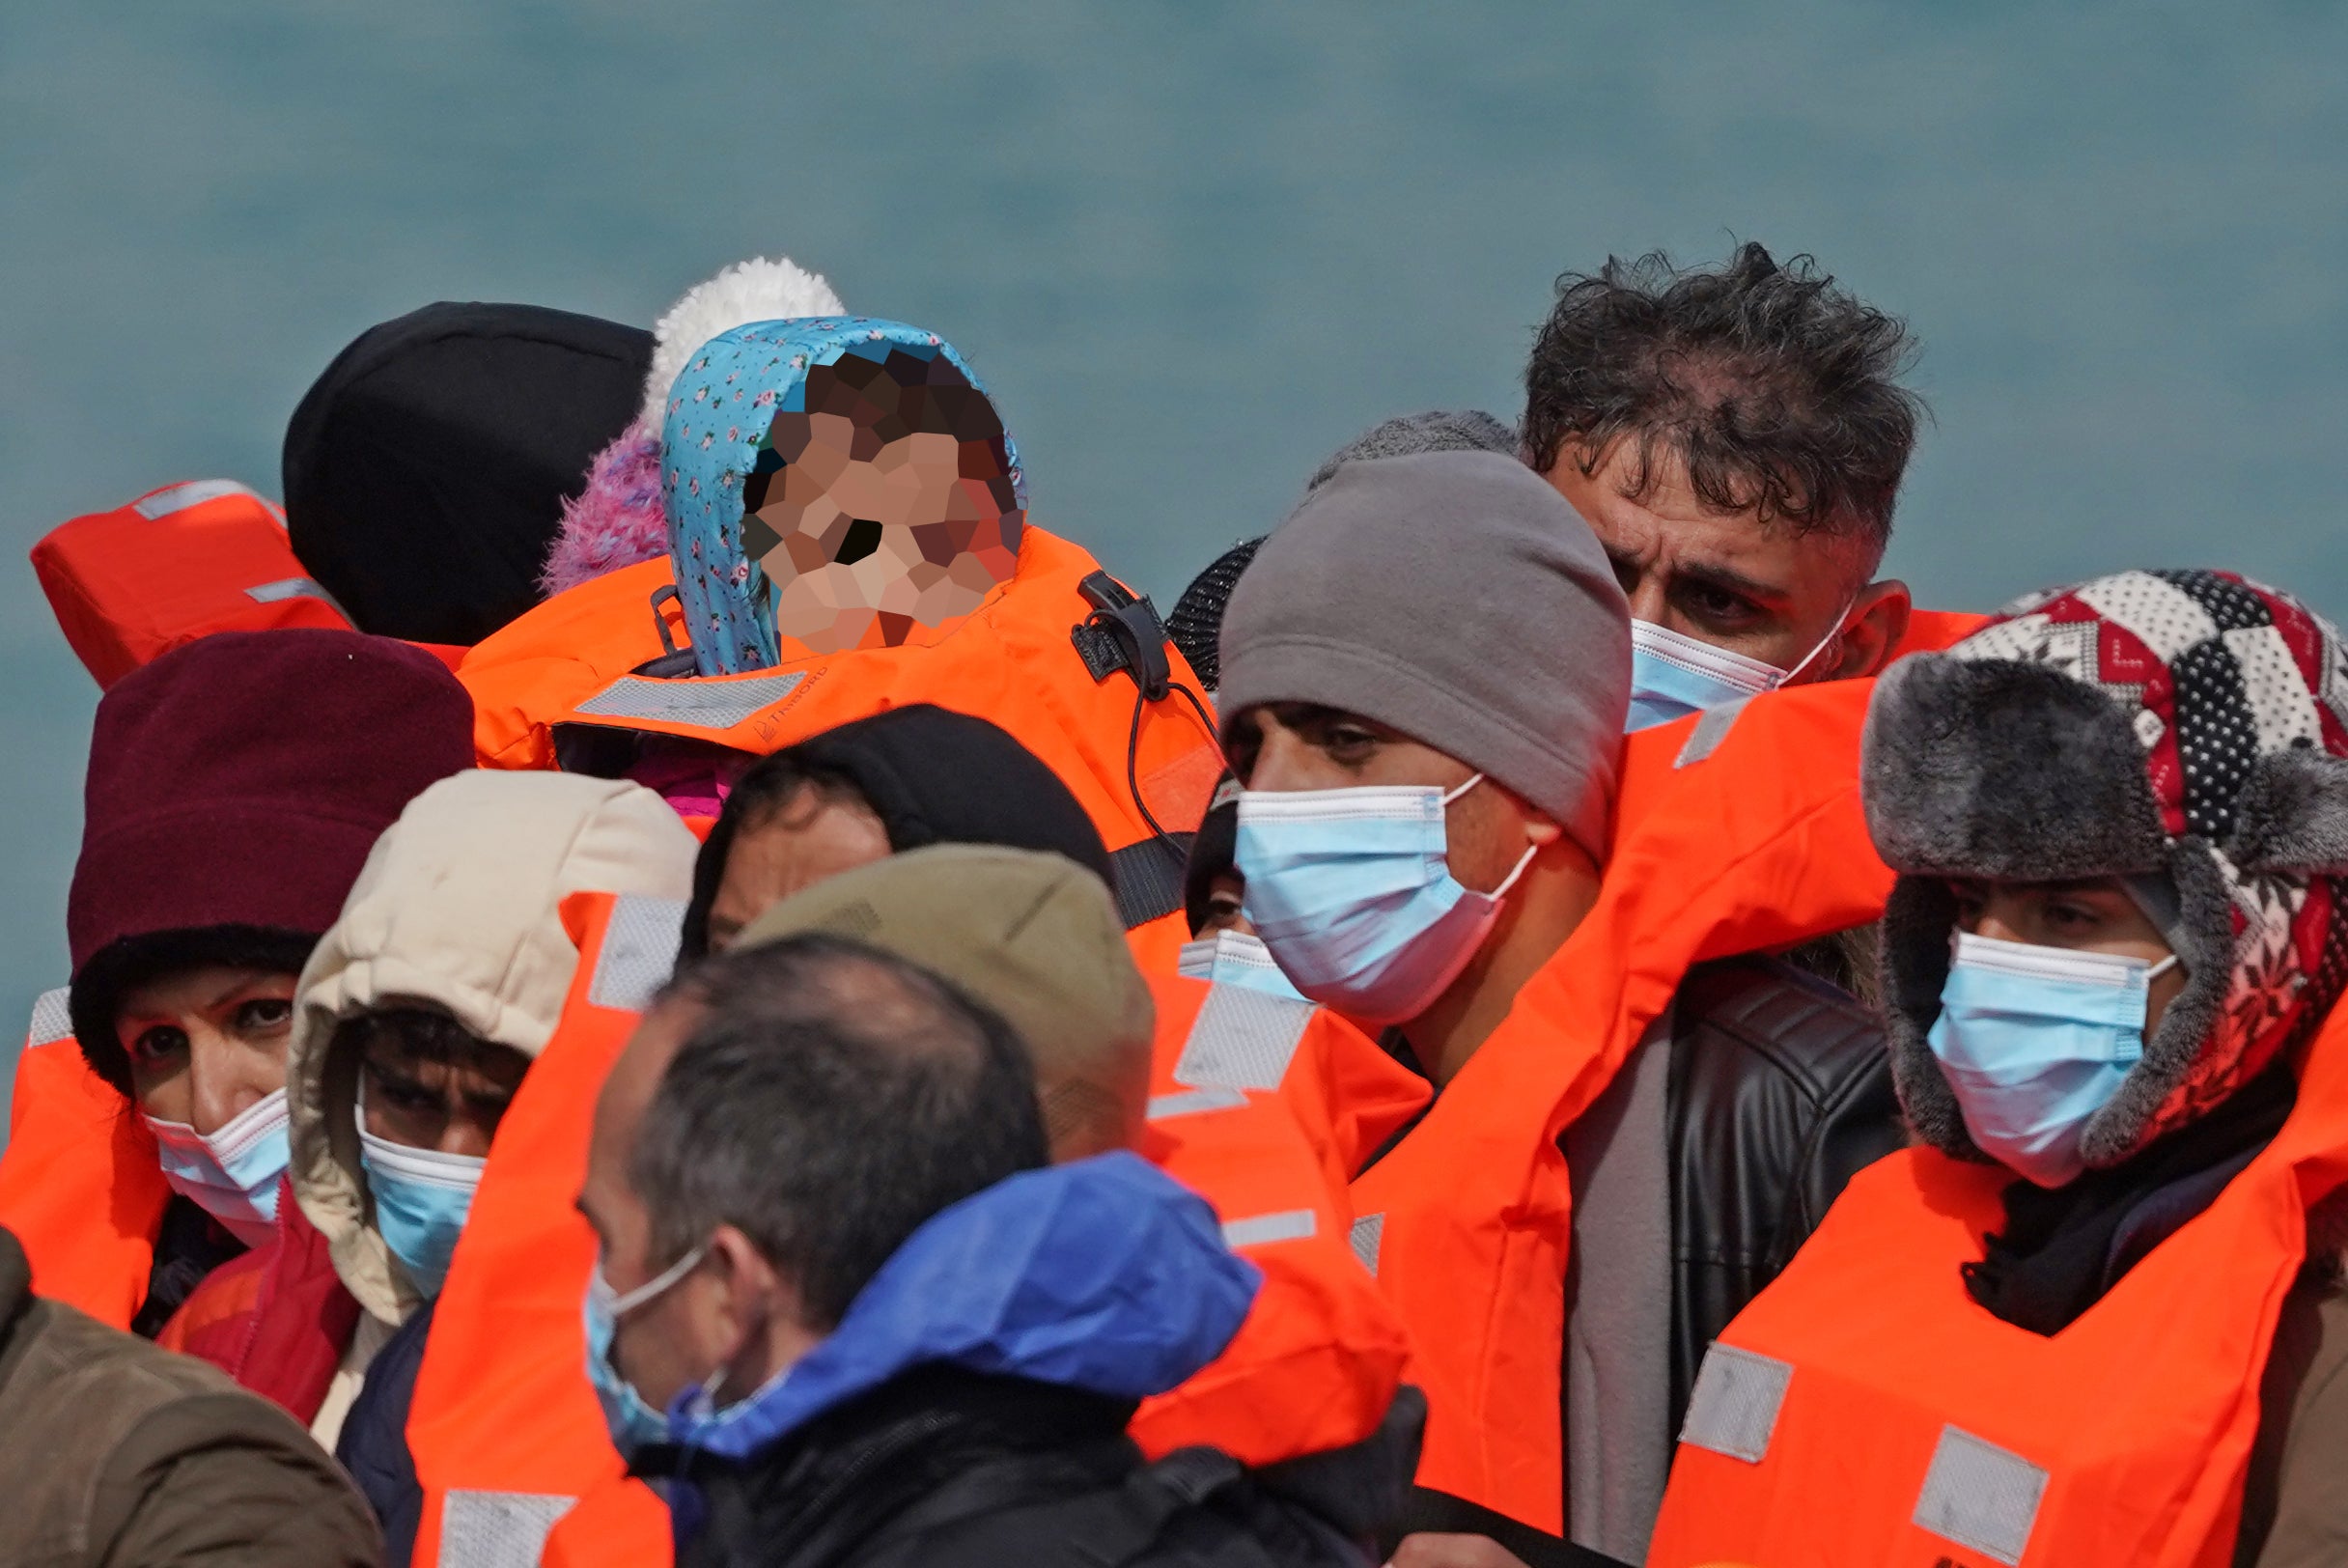 A young child (face pixelated) amongst a group of people thought to be migrants are brought in to Dover, Kent, following a small boat incident in the Channel (Gareth Fuller/PA)